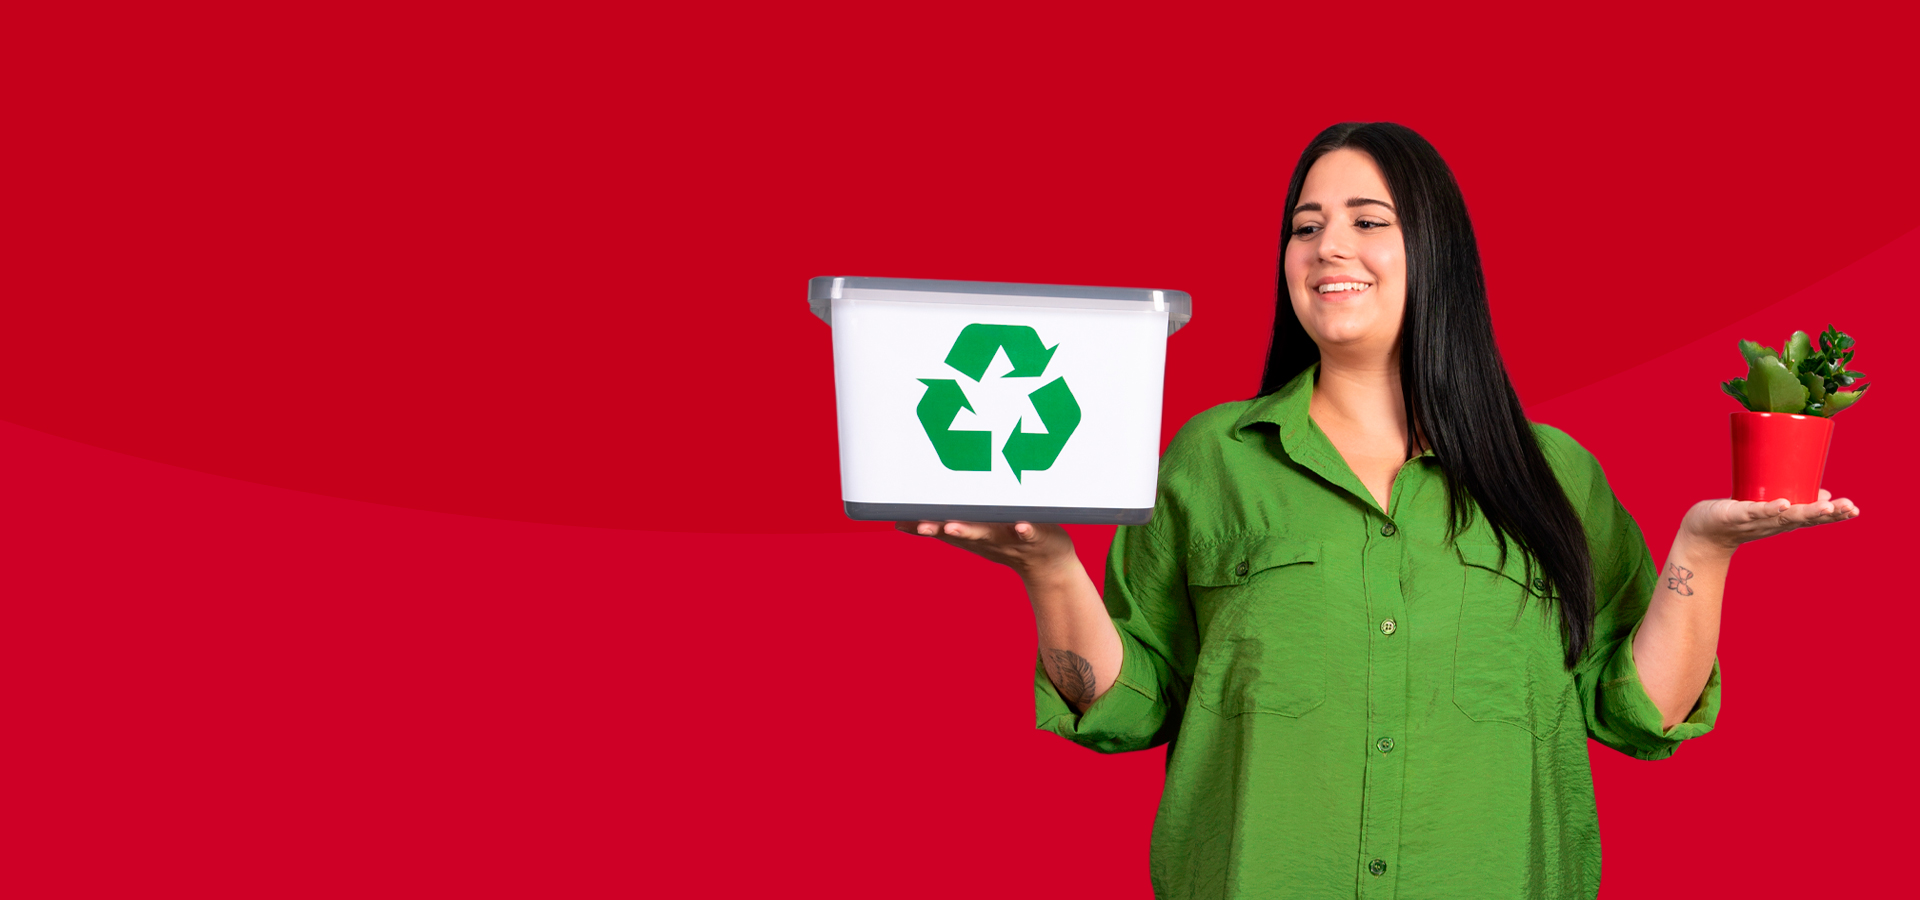 Woman holding a flower pot in the right hand and a box with recycling sign in left hand